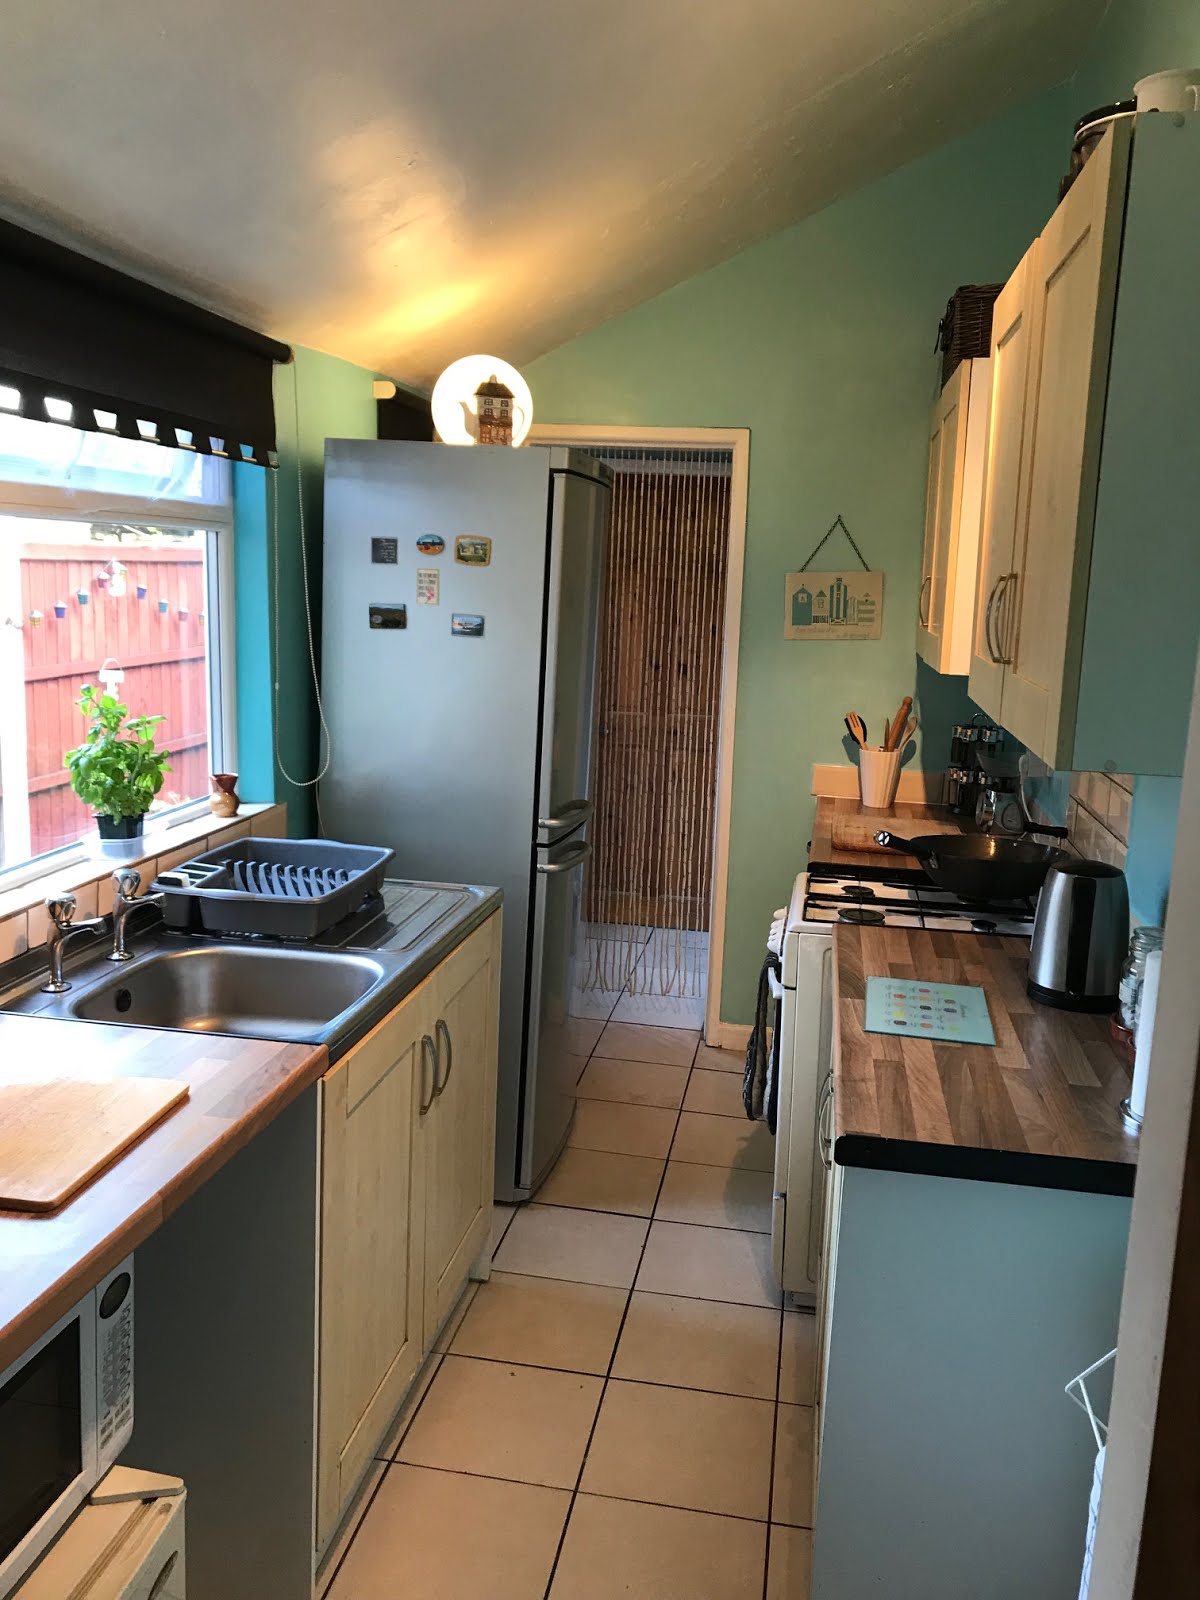 About: Terraced House Kitchen